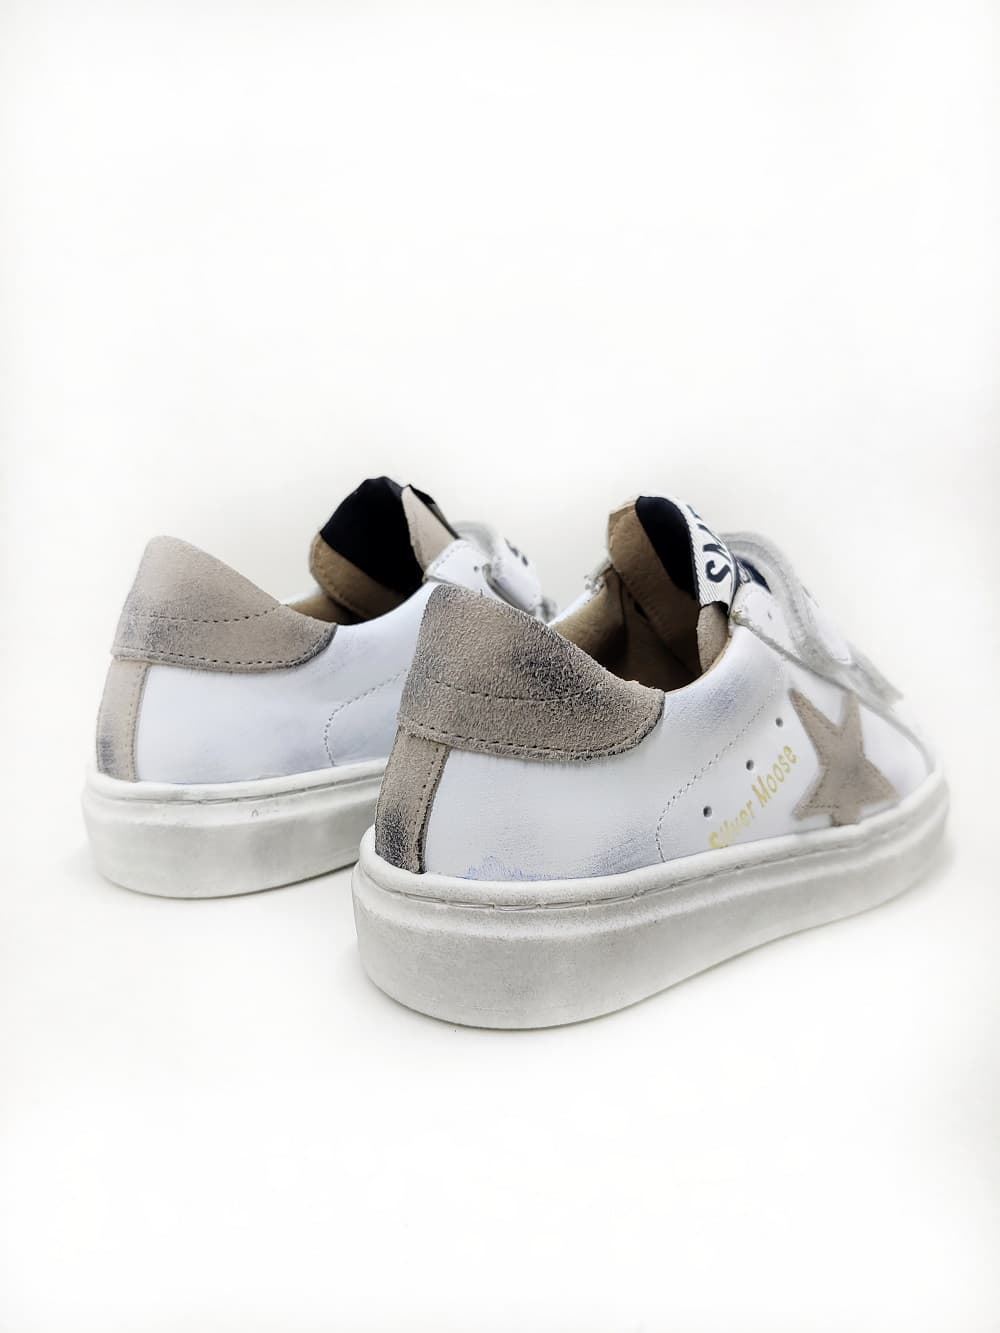 Golden Star Sneakers in White Taupe leather with Velcro - Image 3